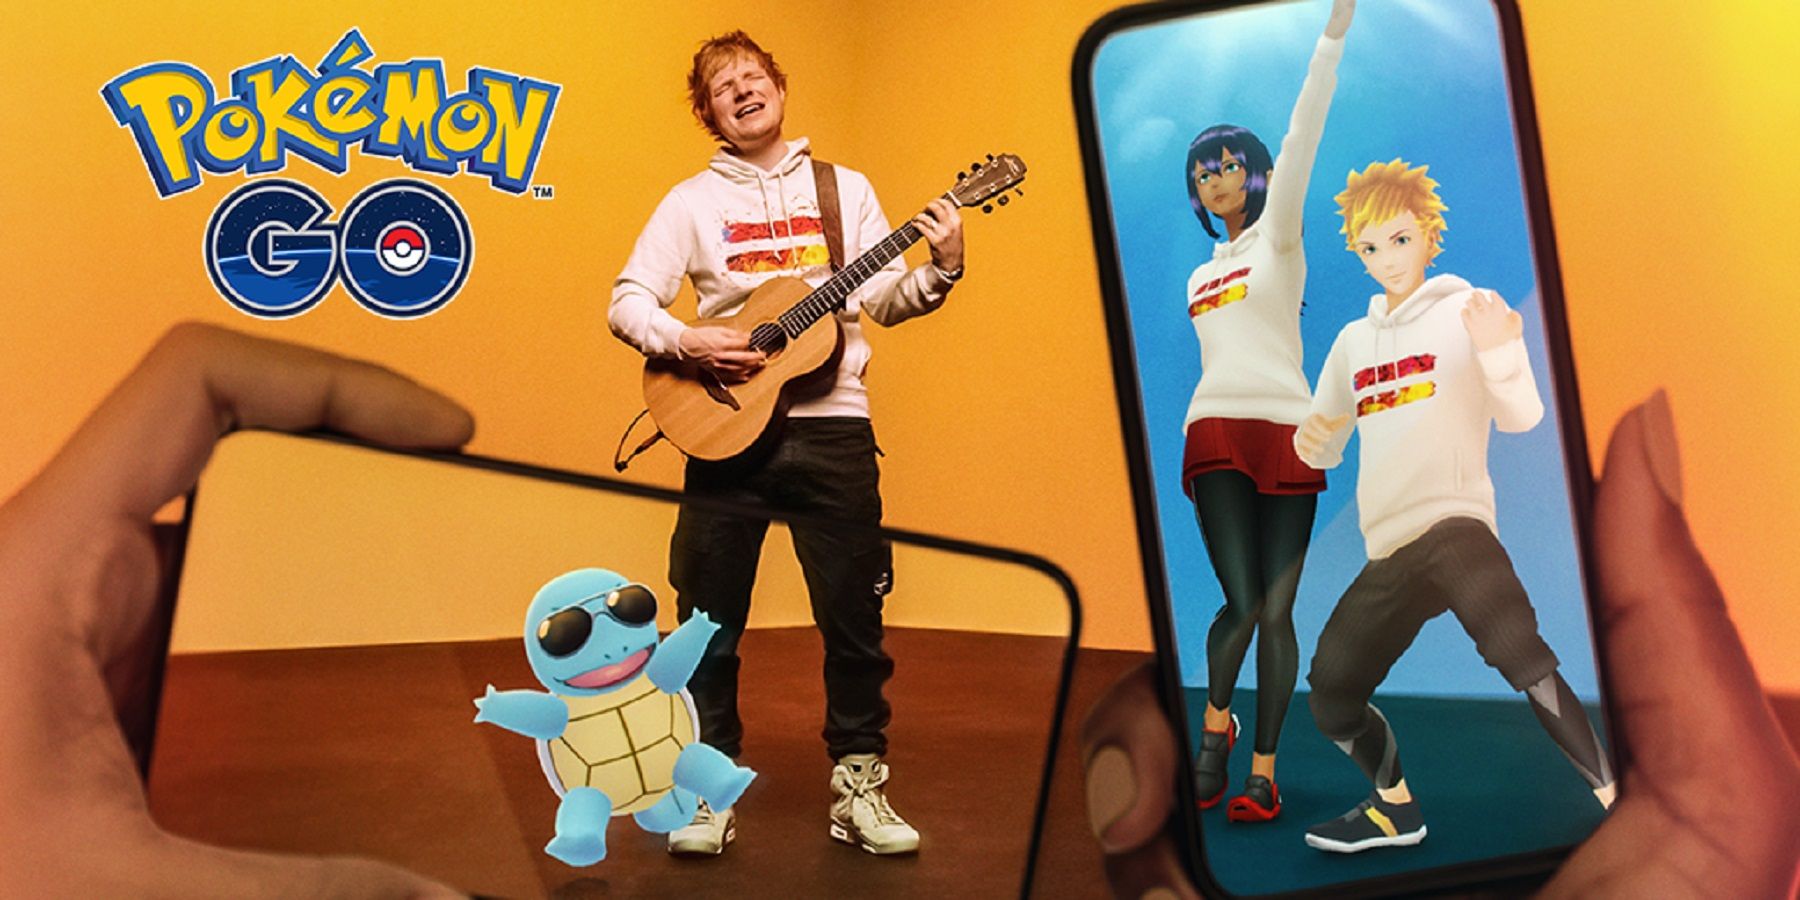 Pokemon GO’s Ed Sheeran Concert Will Never Match the Heights of Fortnite